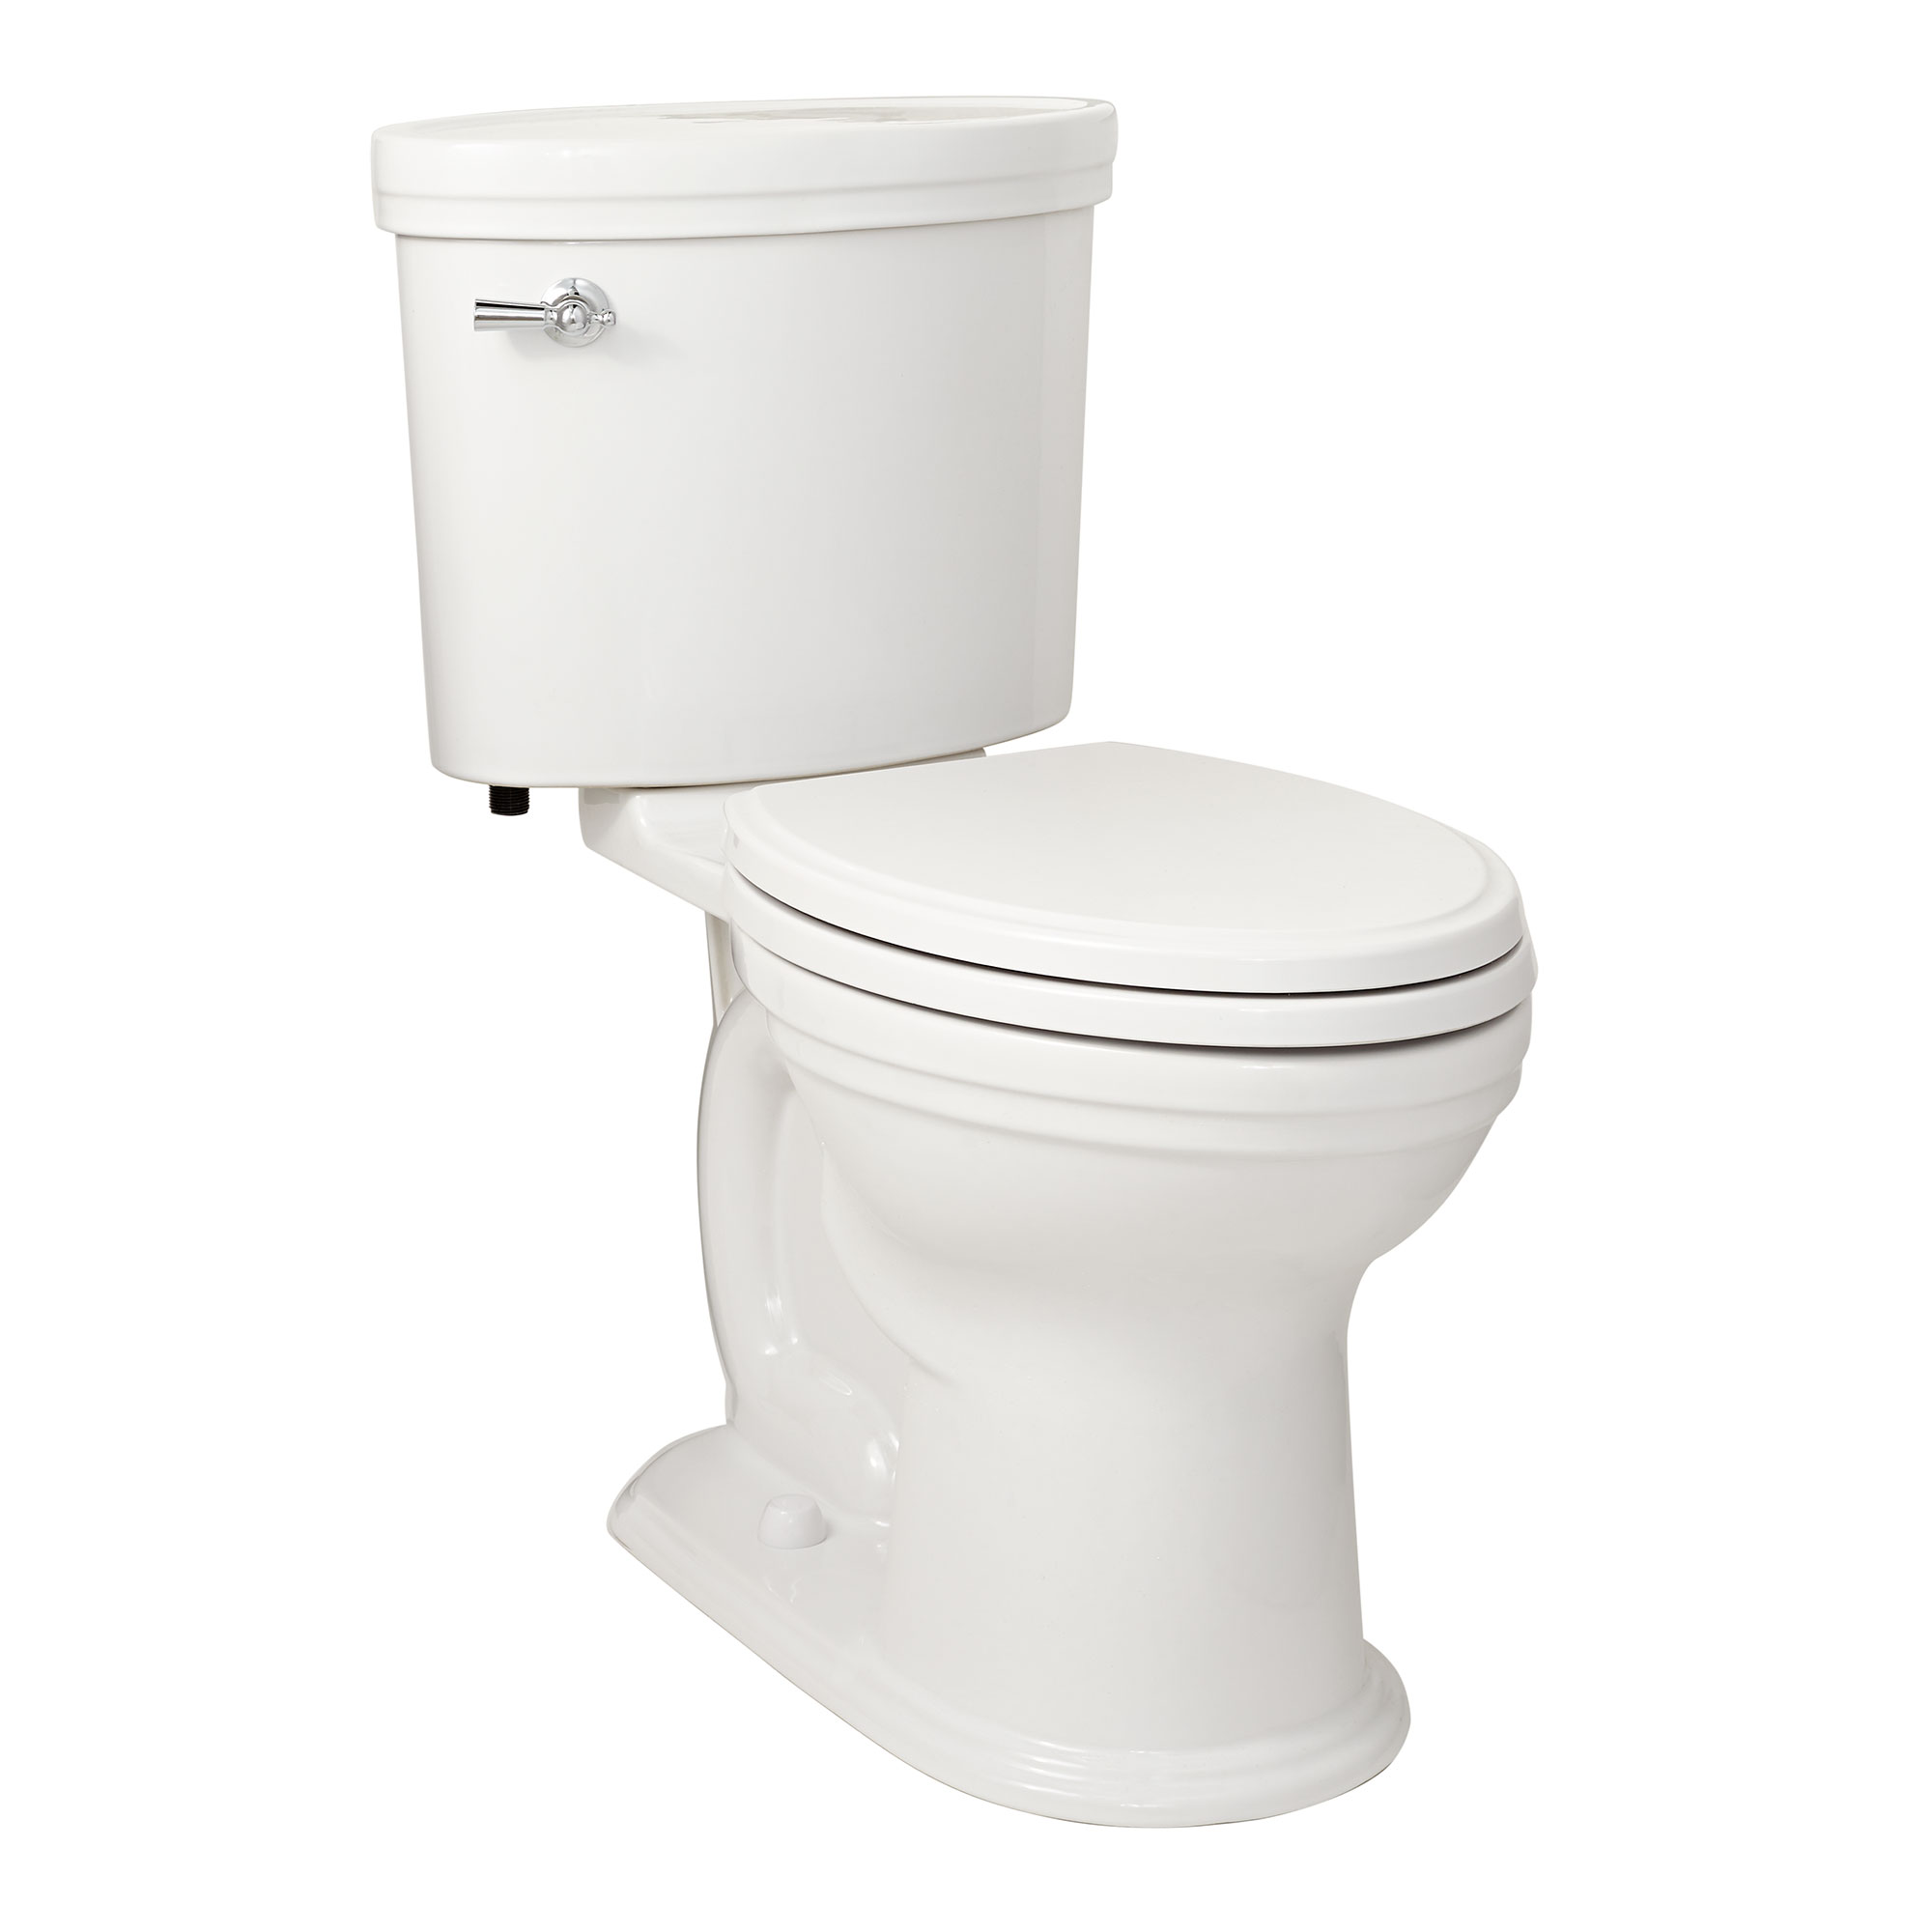 St. George® Two-Piece Chair-Height Elongated Toilet with Seat